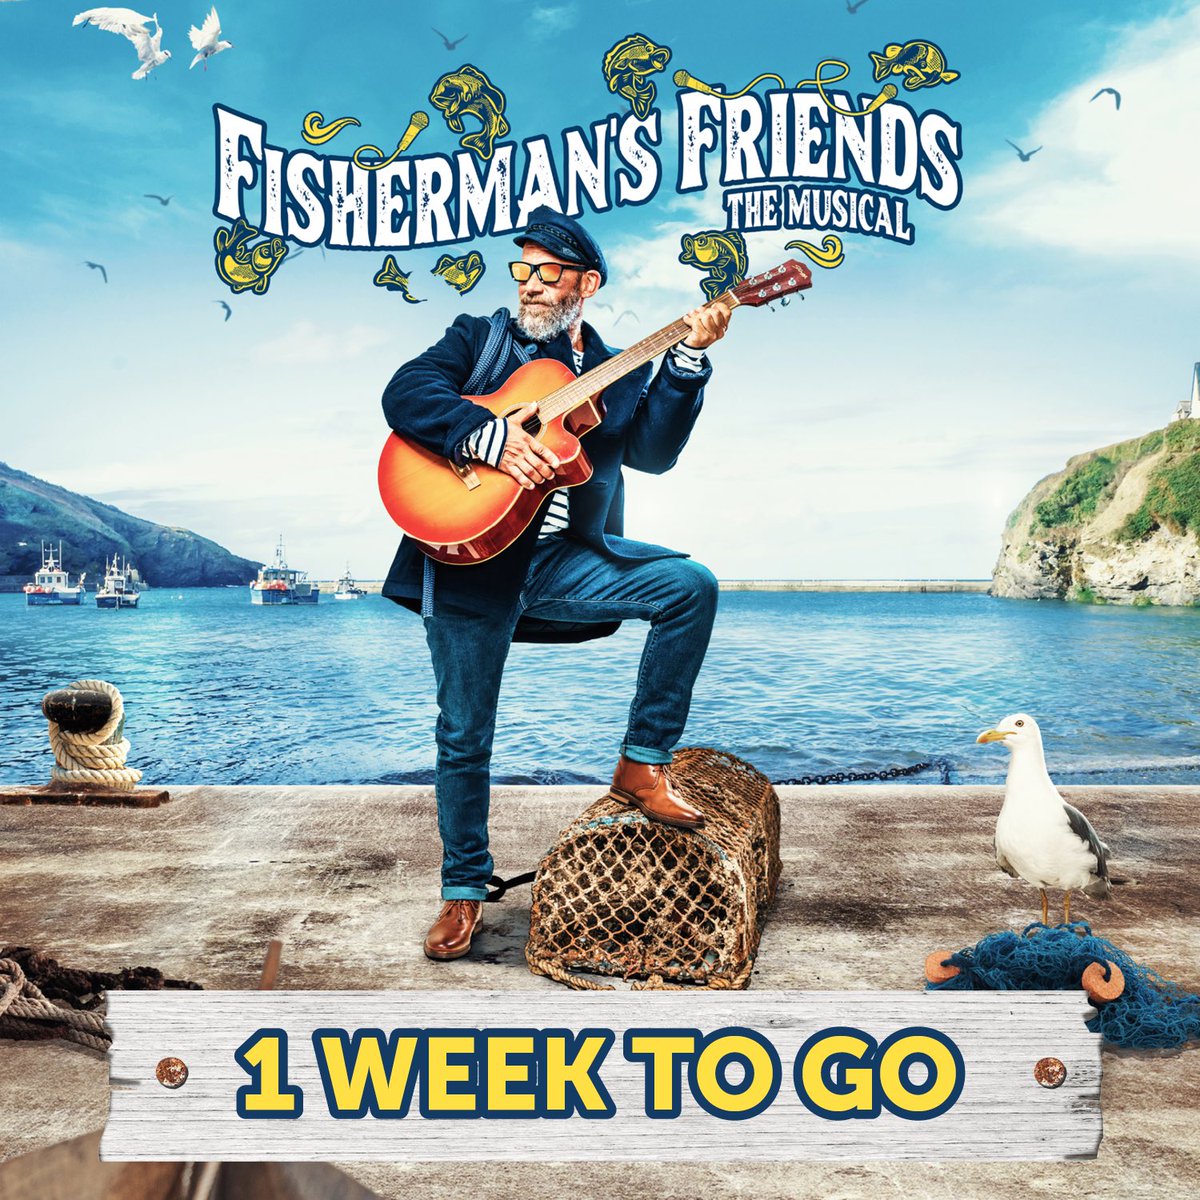 #FishermansFriends is a show unlike any other - you’ve got to SEA it to believe it! 🤩

Book today: fishermanonstage.com